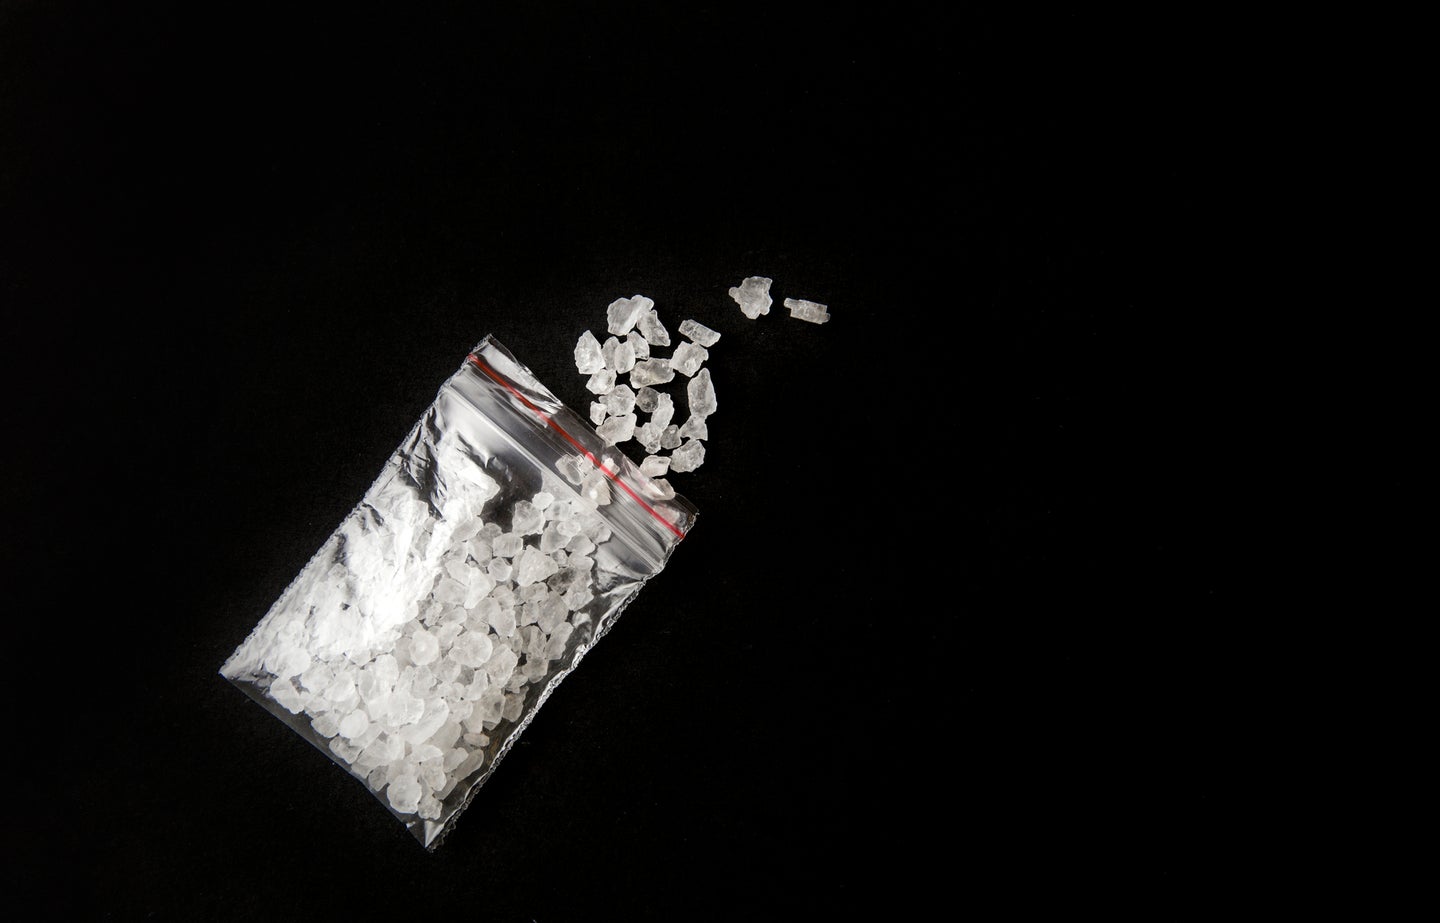 Dime bag of bath salts on a black background to represent synthetic or designer drugs